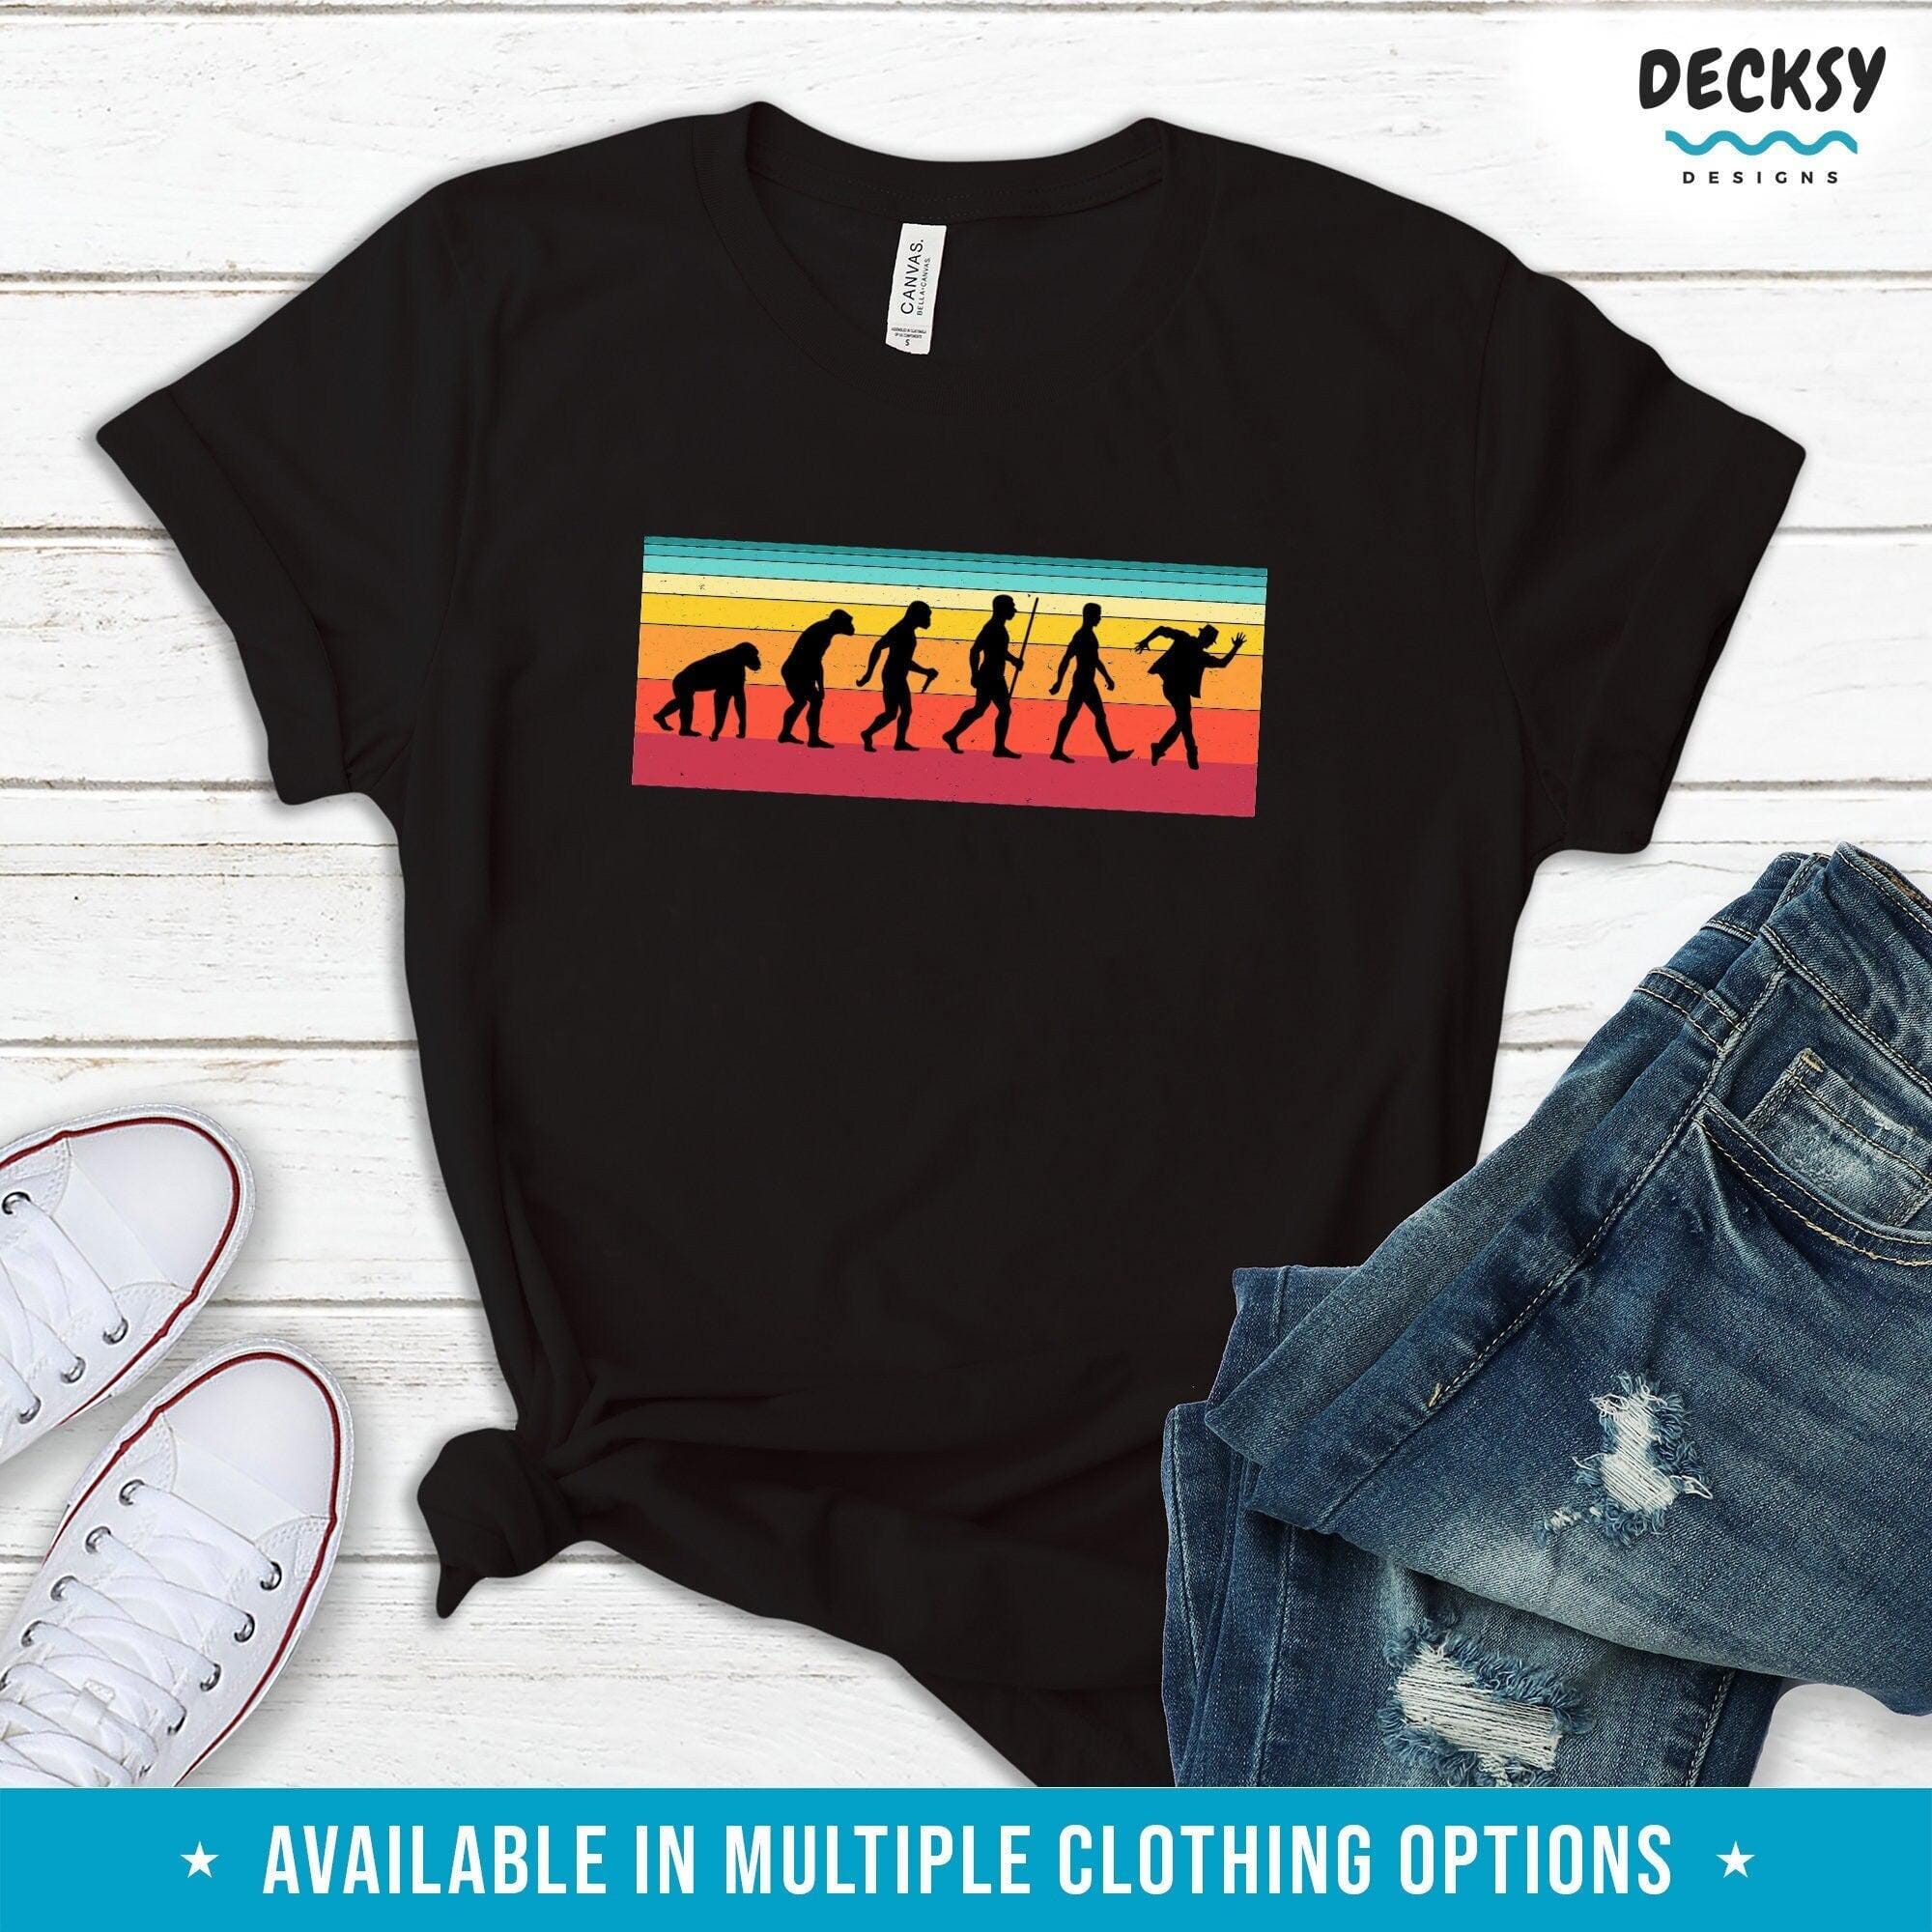 Breakdance Shirt, Dancer Gifts Men-Clothing:Gender-Neutral Adult Clothing:Tops & Tees:T-shirts:Graphic Tees-DecksyDesigns